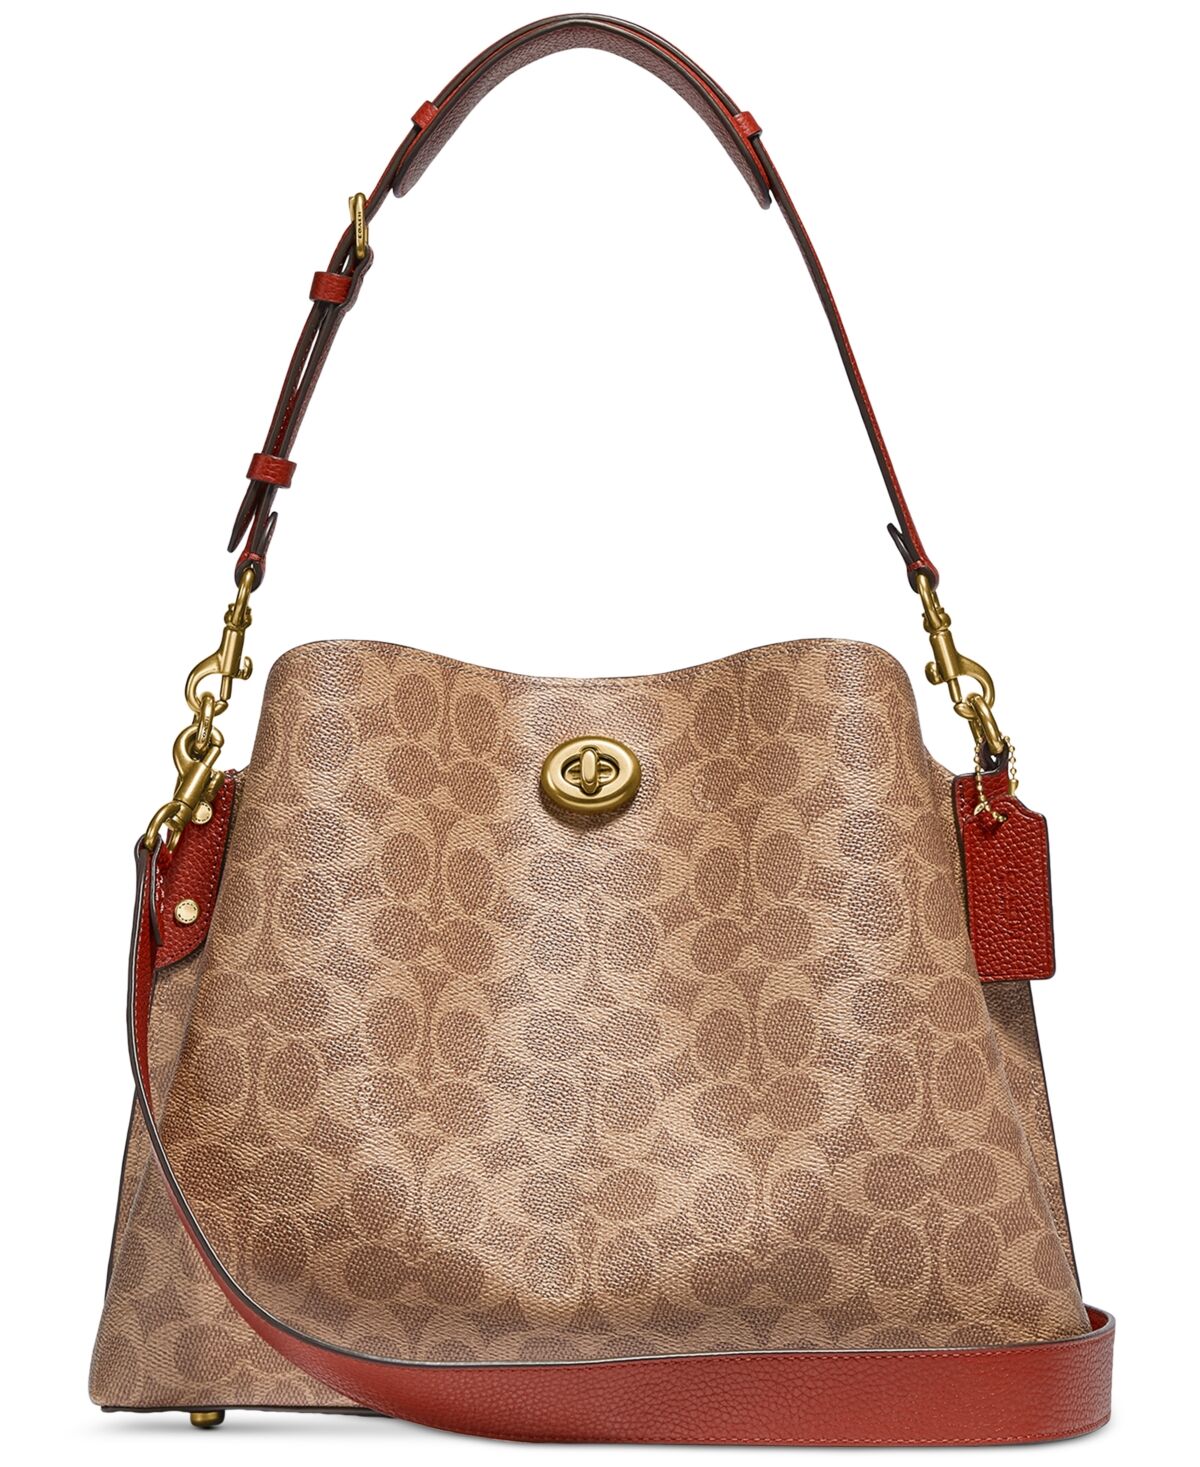 Coach Signature Coated Canvas Willow Shoulder Bag with Convertible Straps - Tan Rust